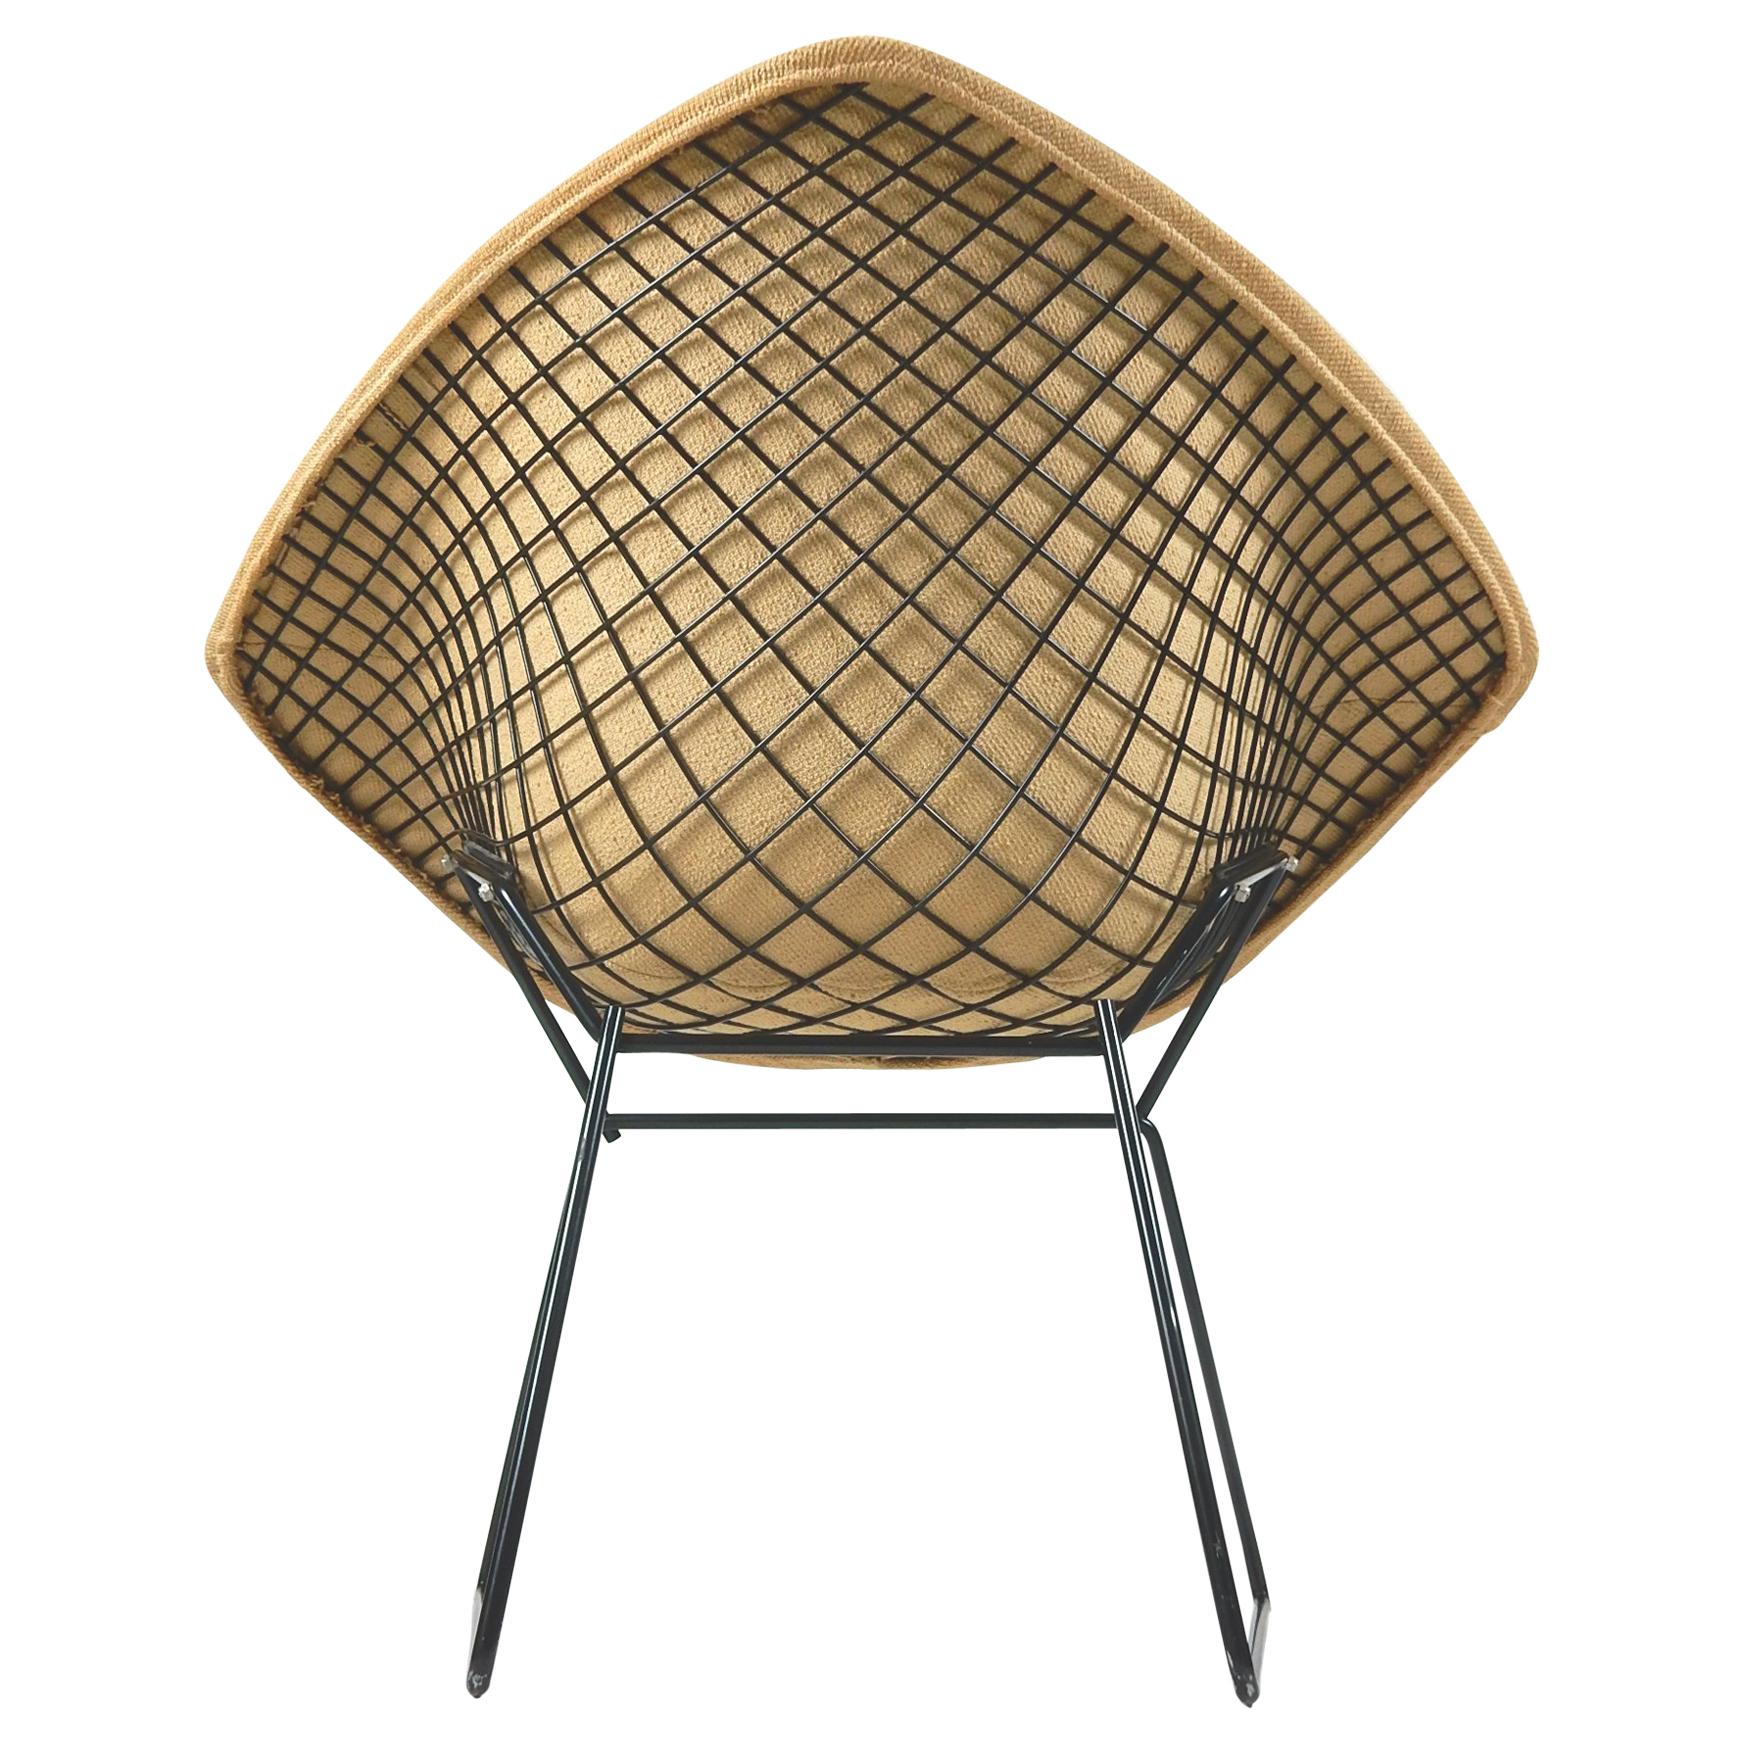 Rare early production of the diamond chair by Harry Bertoia. 
Completely original upholstery and black finish. Tagged 